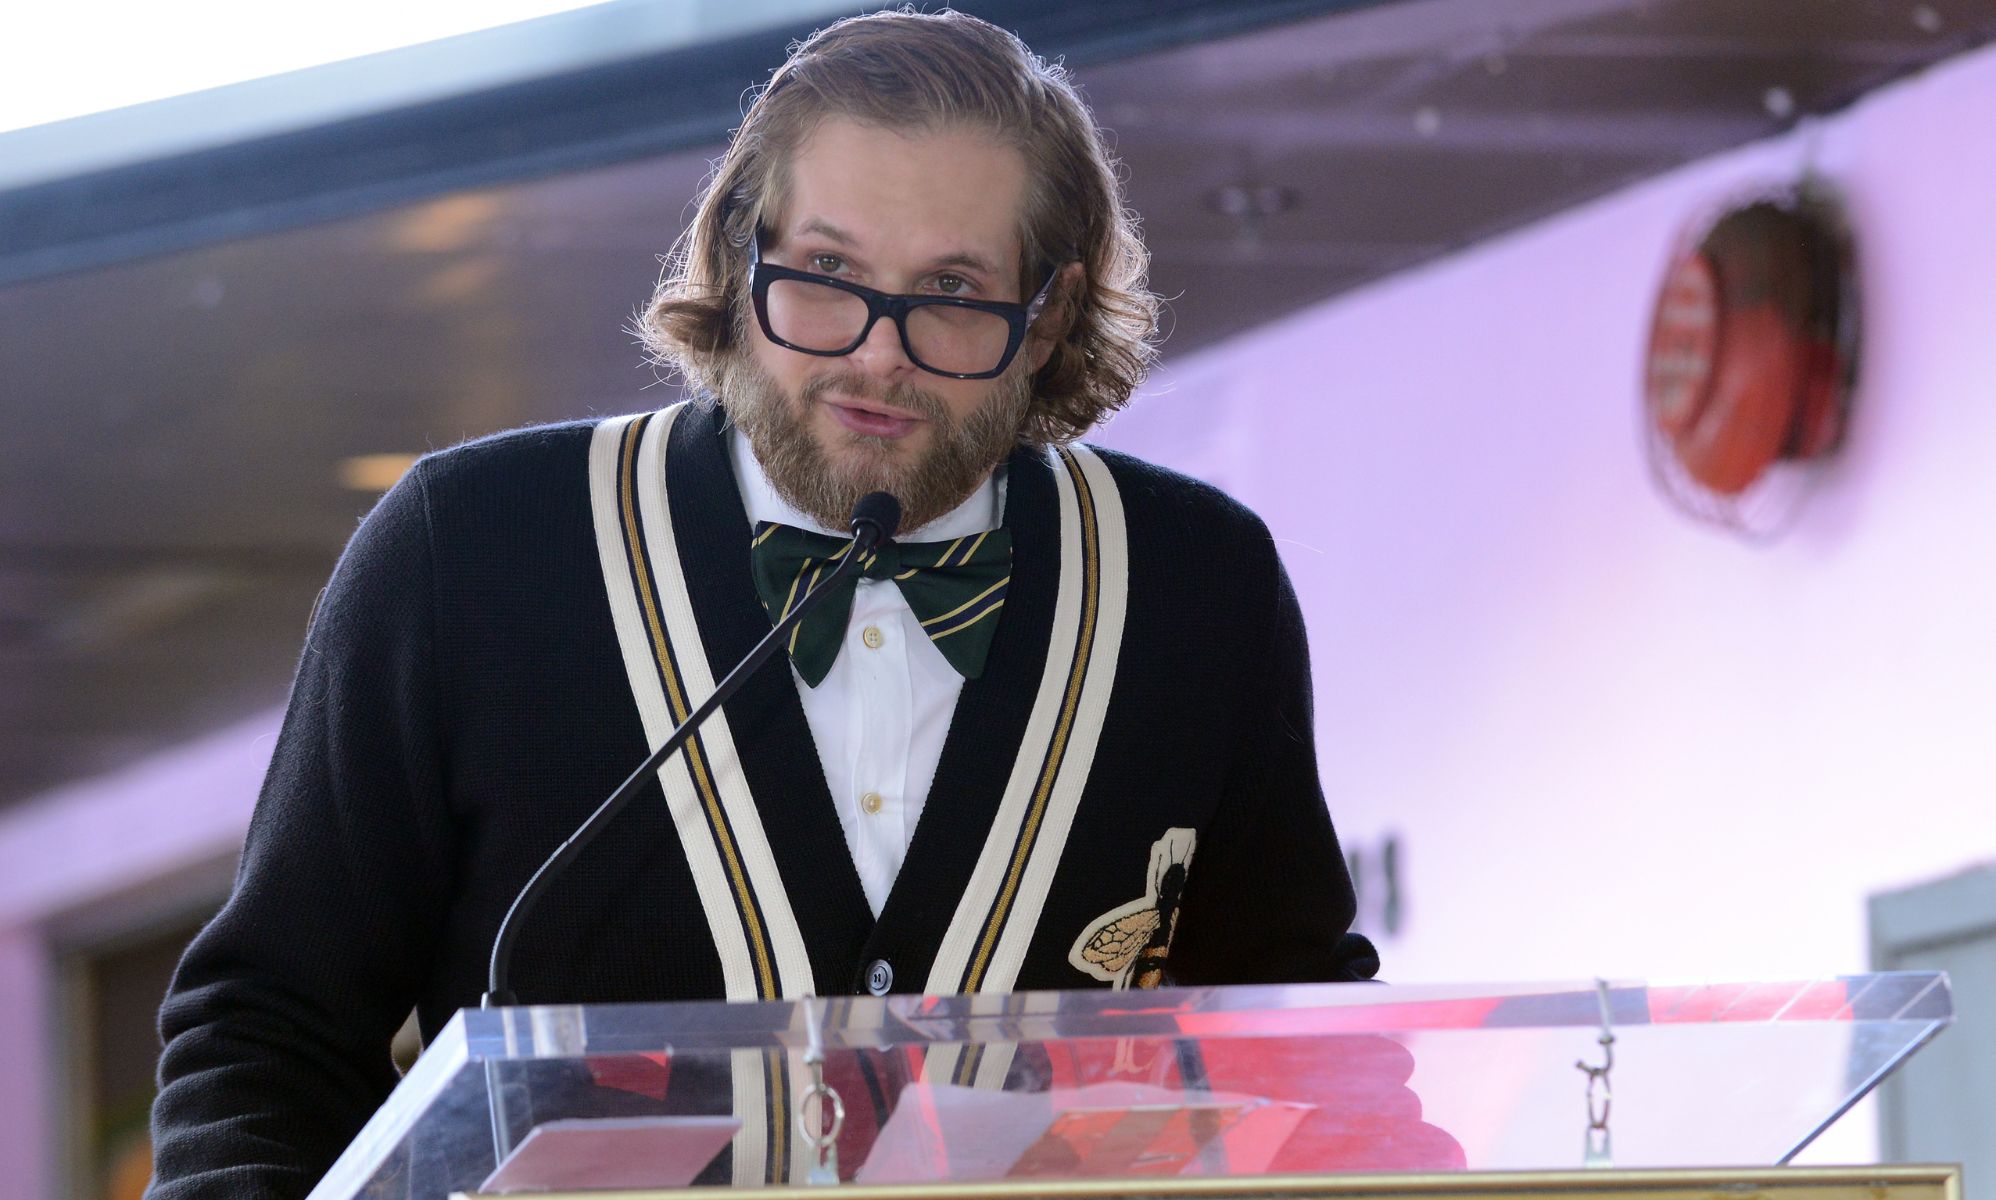 Hannibal Creator Bryan Fuller Sued For Alleged Sexual Harassment 0448